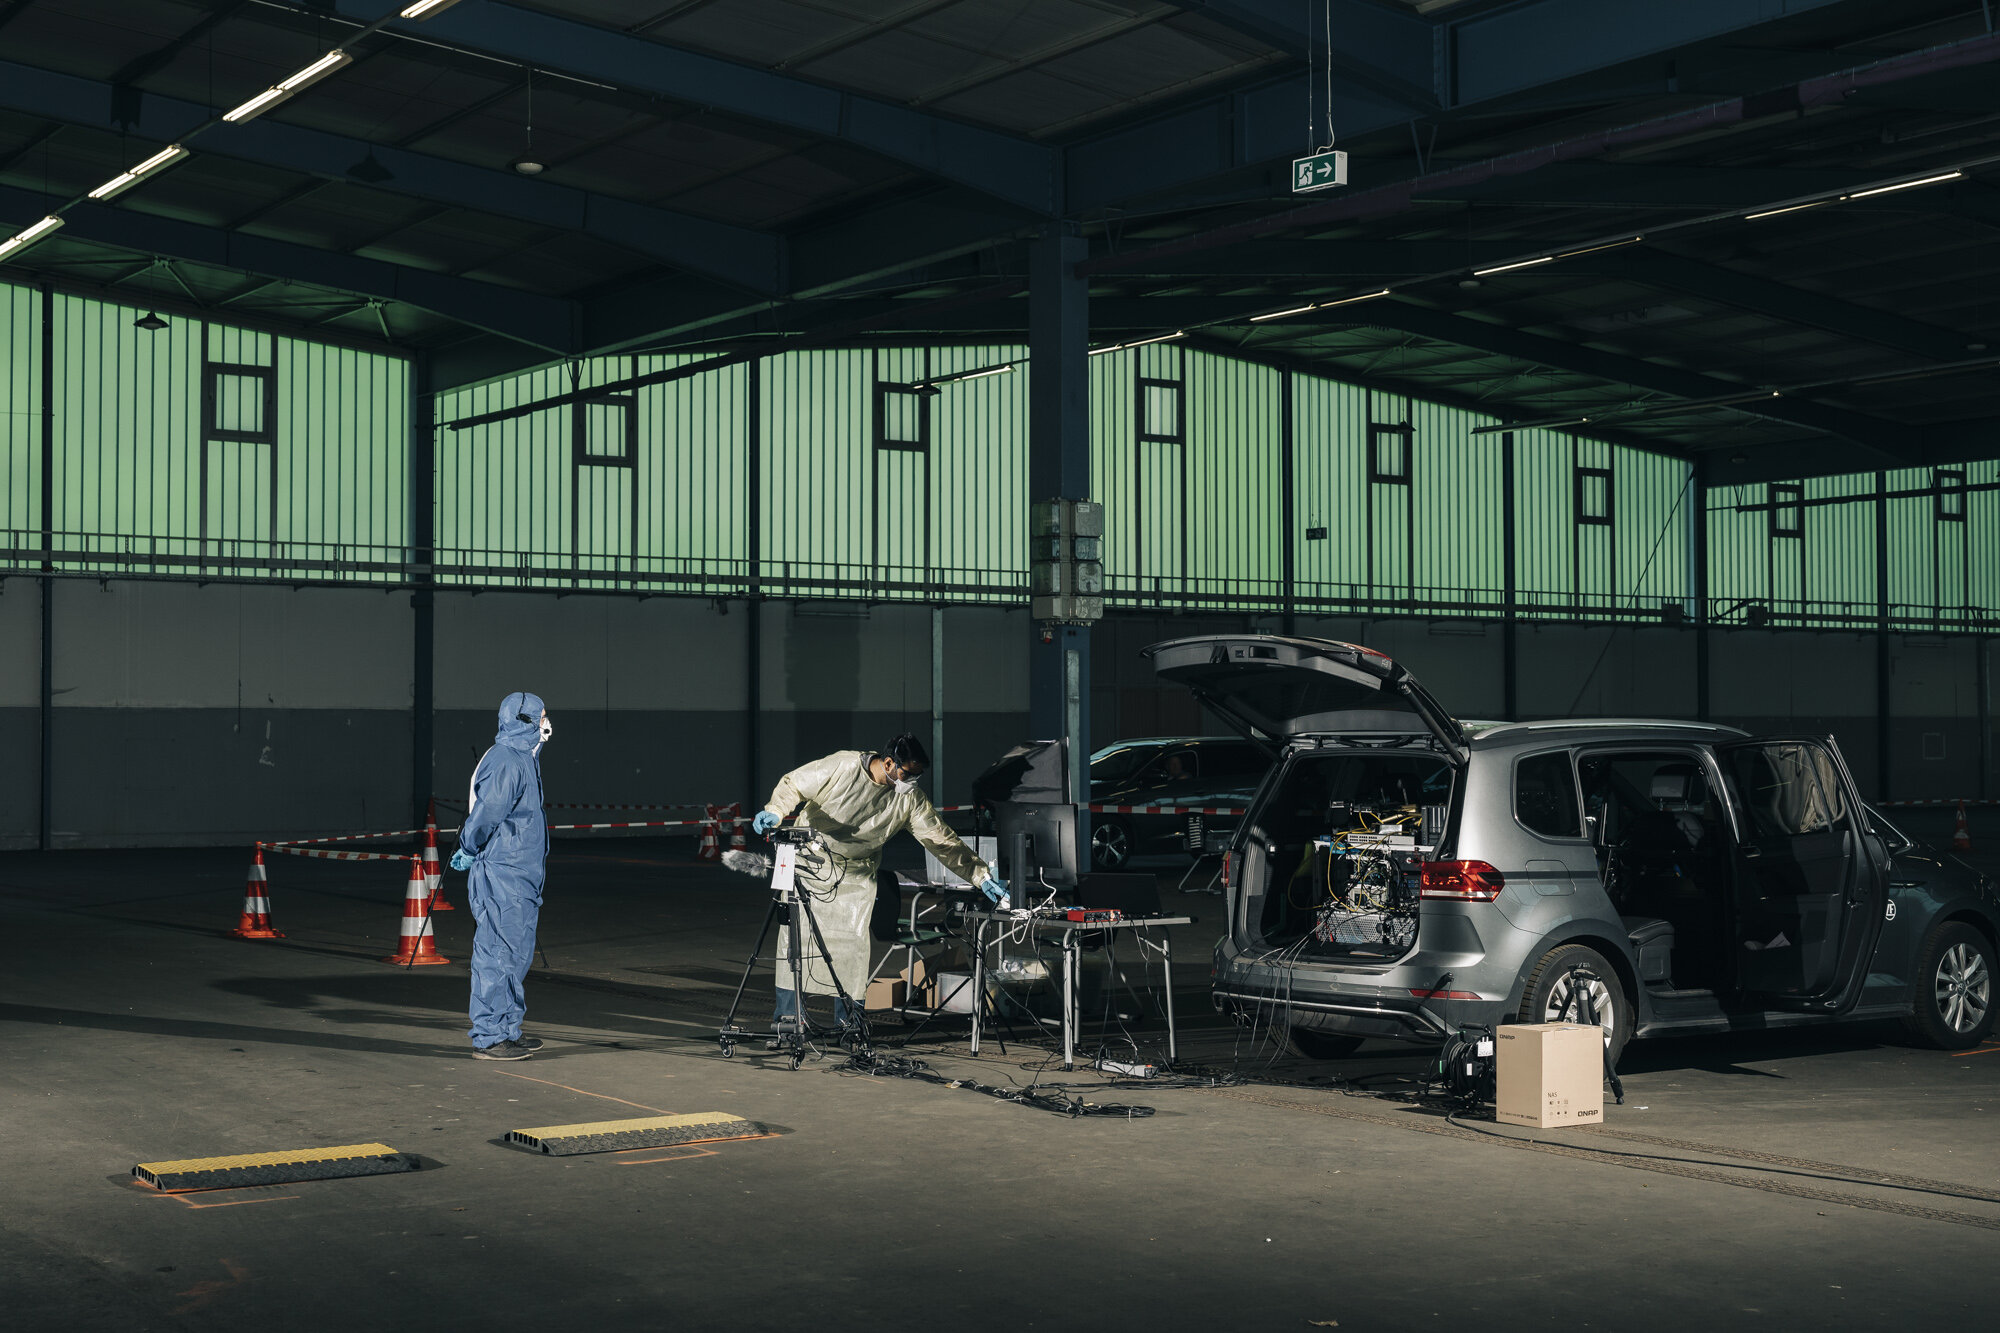  Researchers Tobias G. and Mayur J. are investigating at the Covid-19 drive-in test station at the Saarbrücken Exhibition Centre to determine whether Covid-19 symptoms can also be detected without contact. After people have been gestured by a doctor